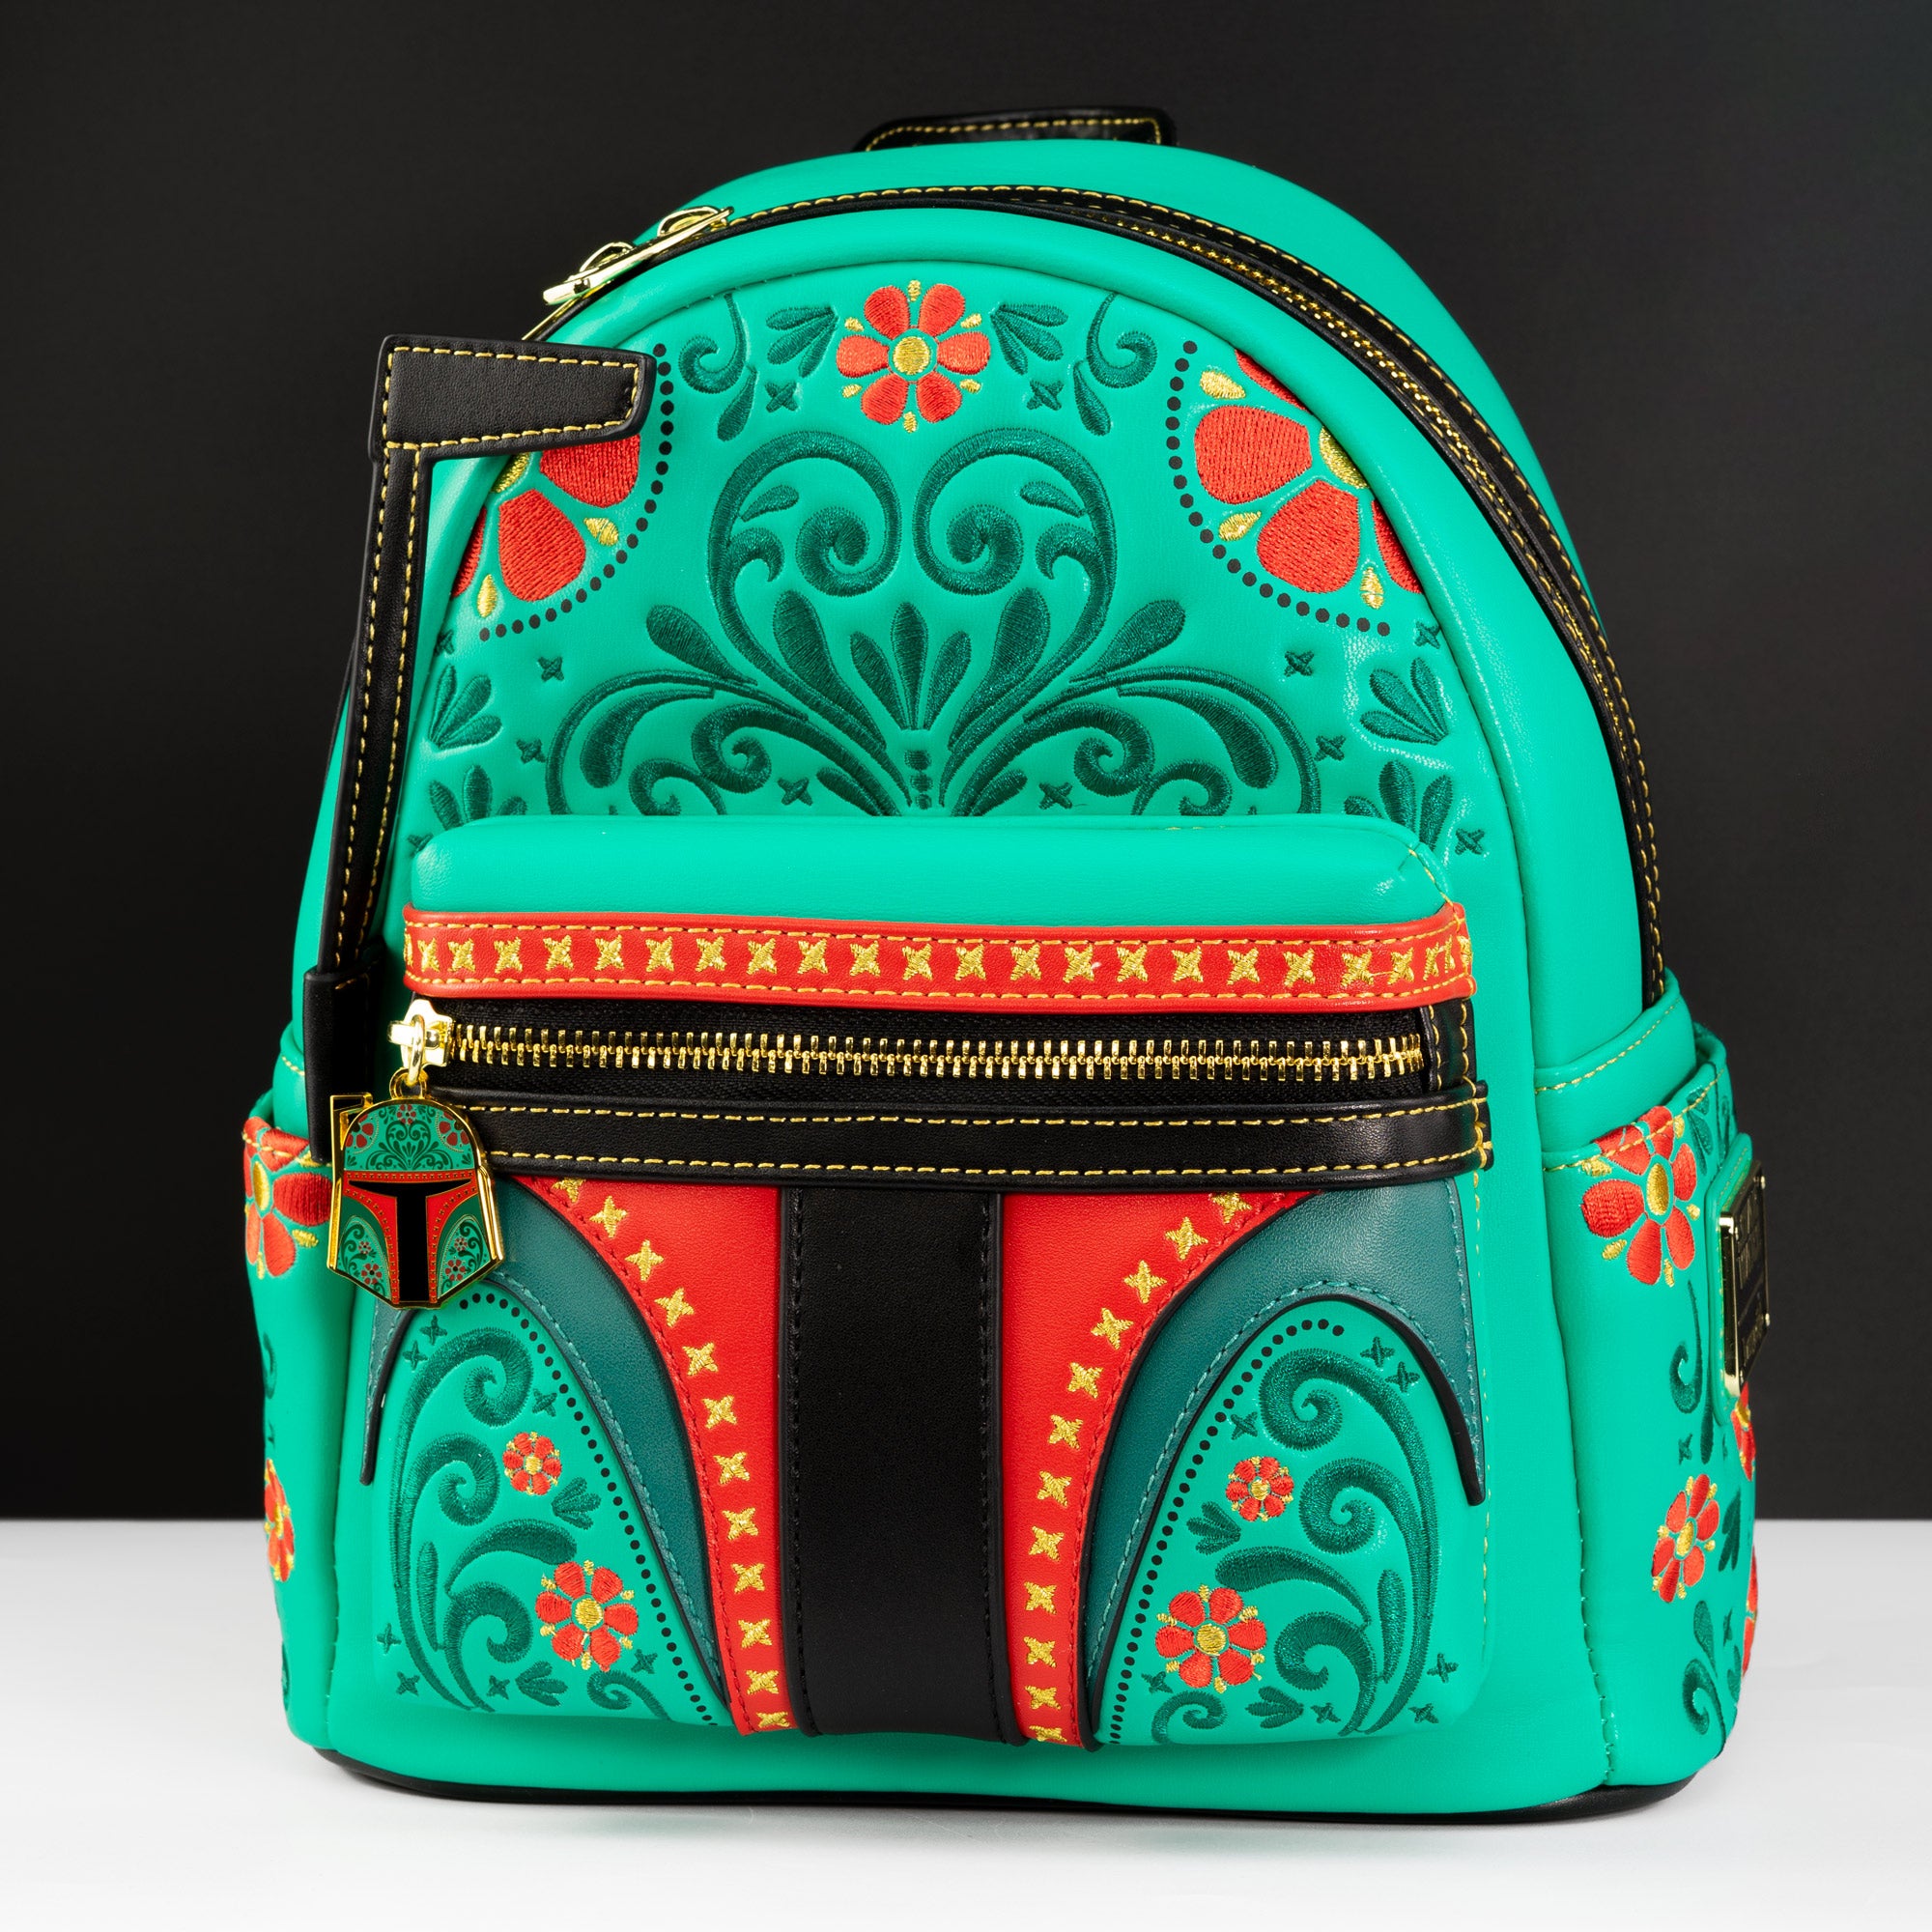 Loungefly x Star Wars Boba Fett Floral Cosplay Mini Backpack